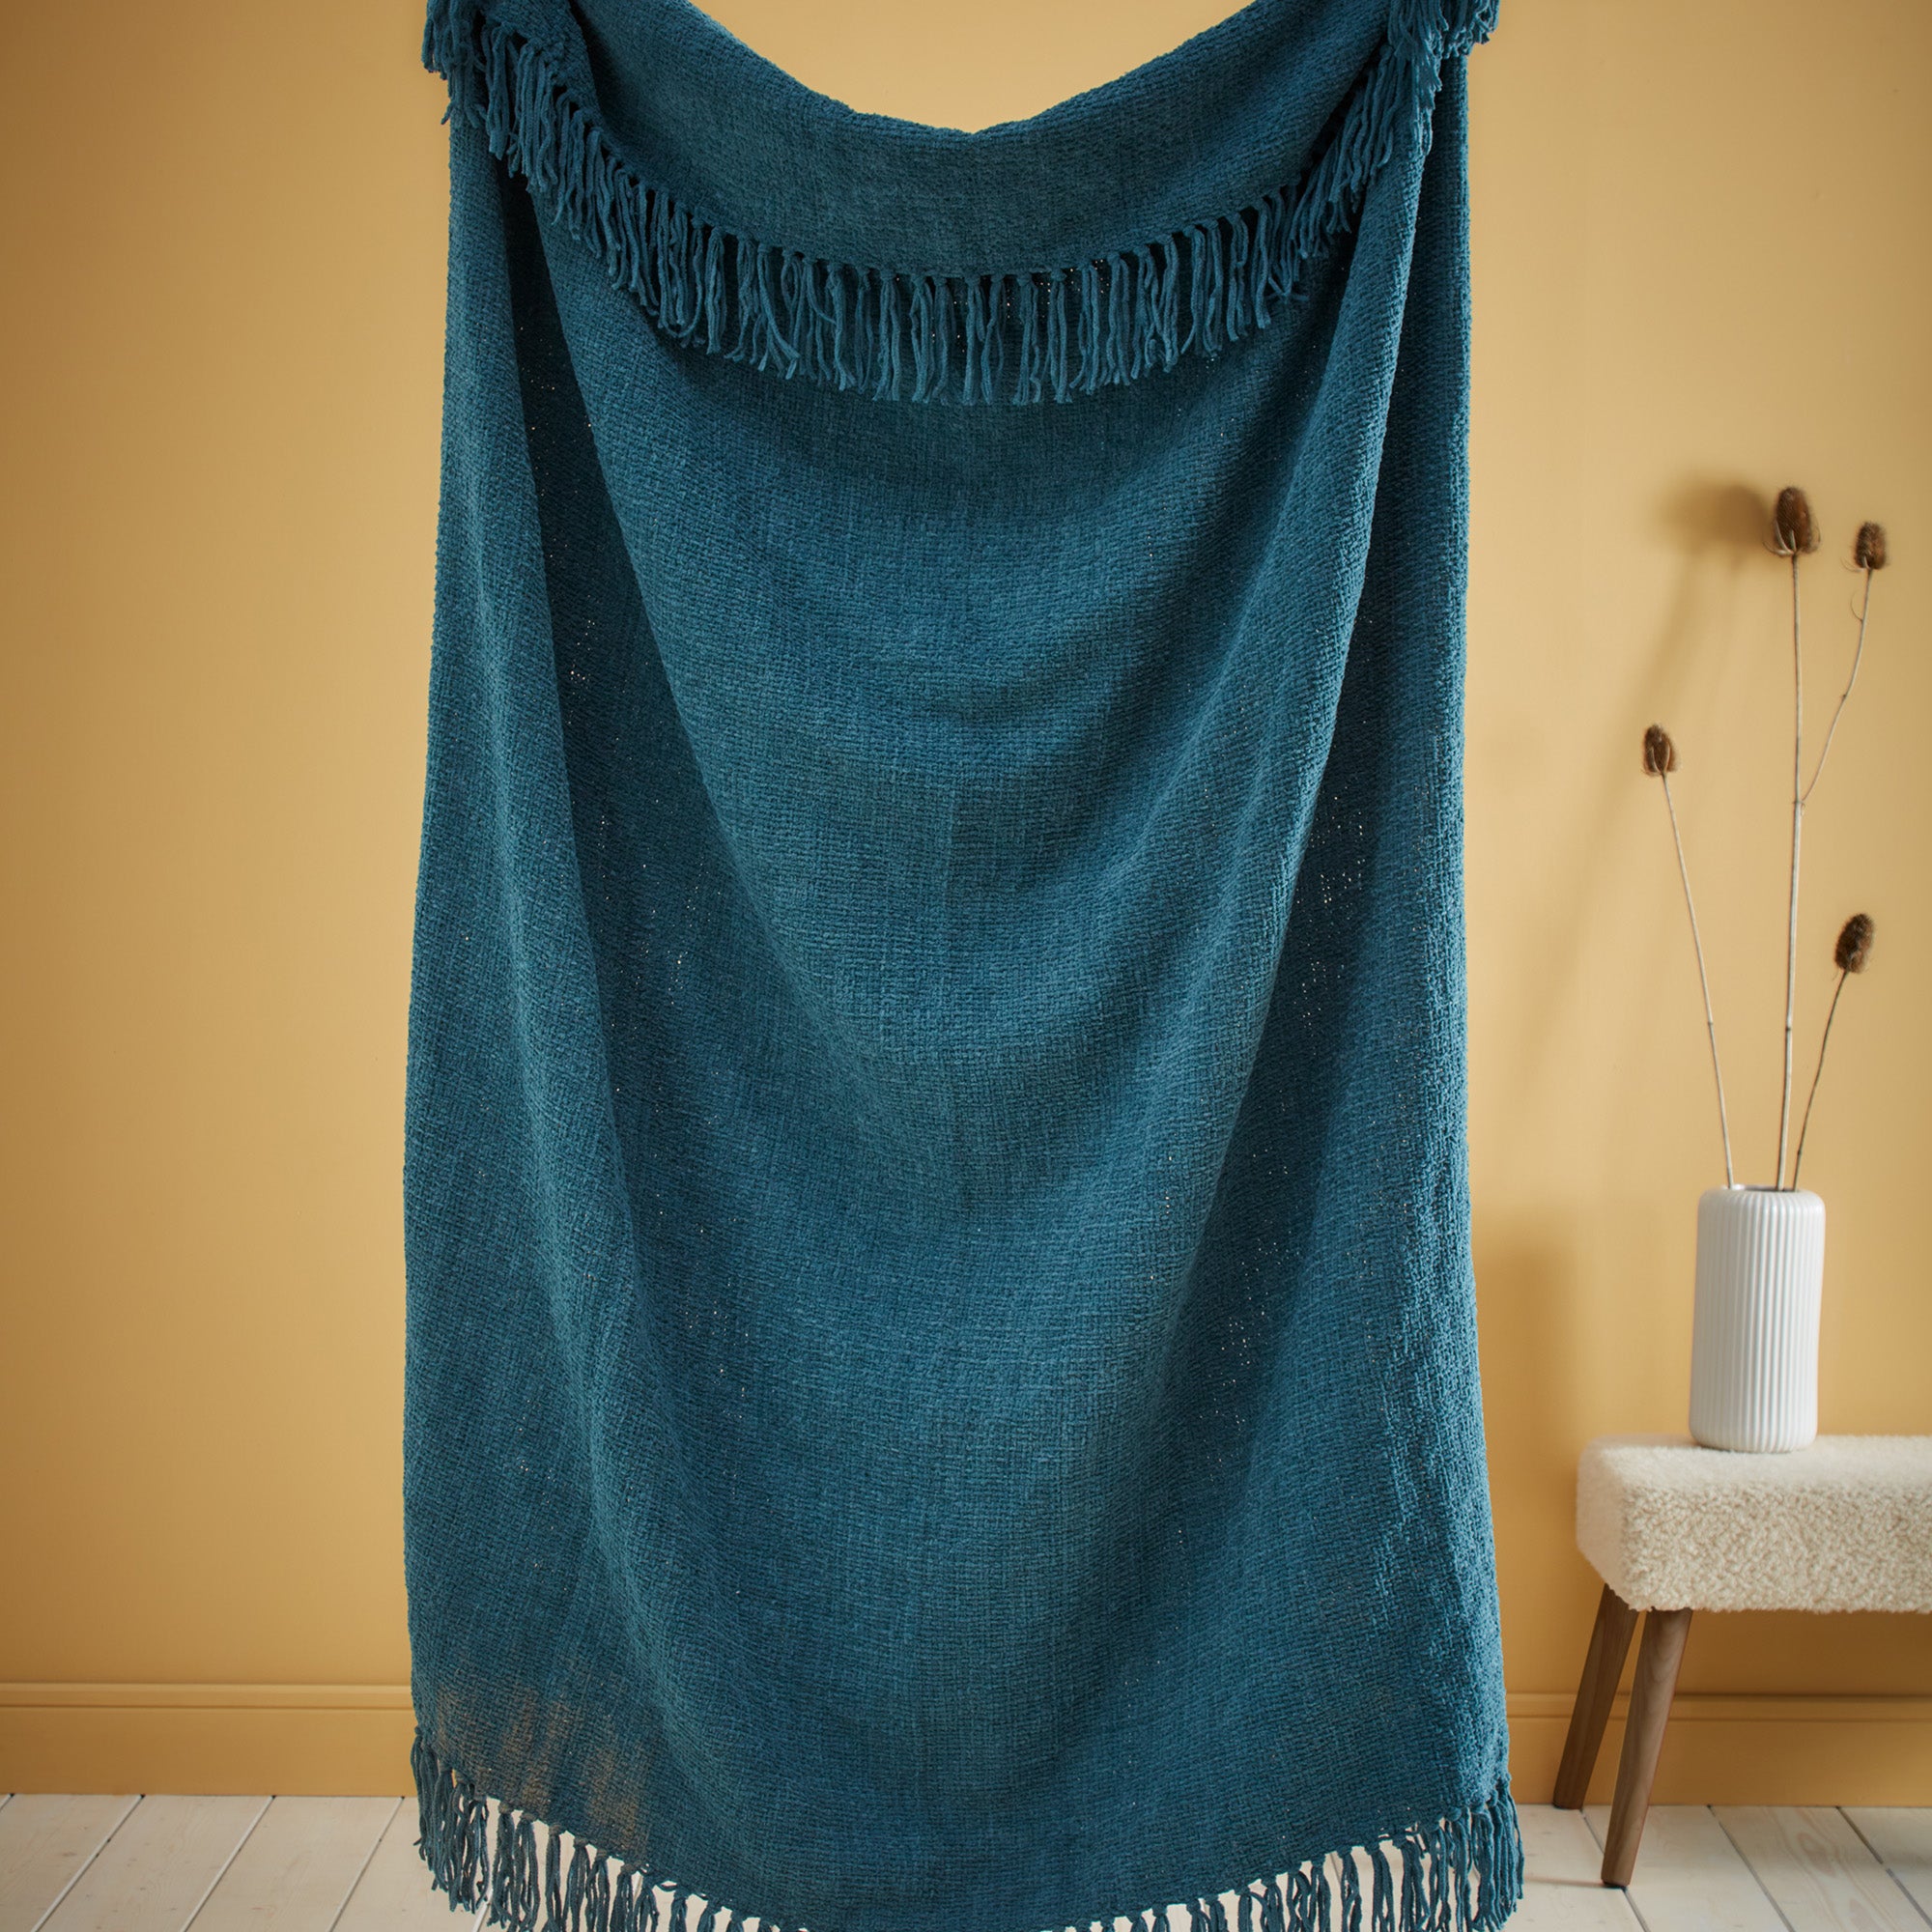 Throw Chenille by Appletree Loft in Teal